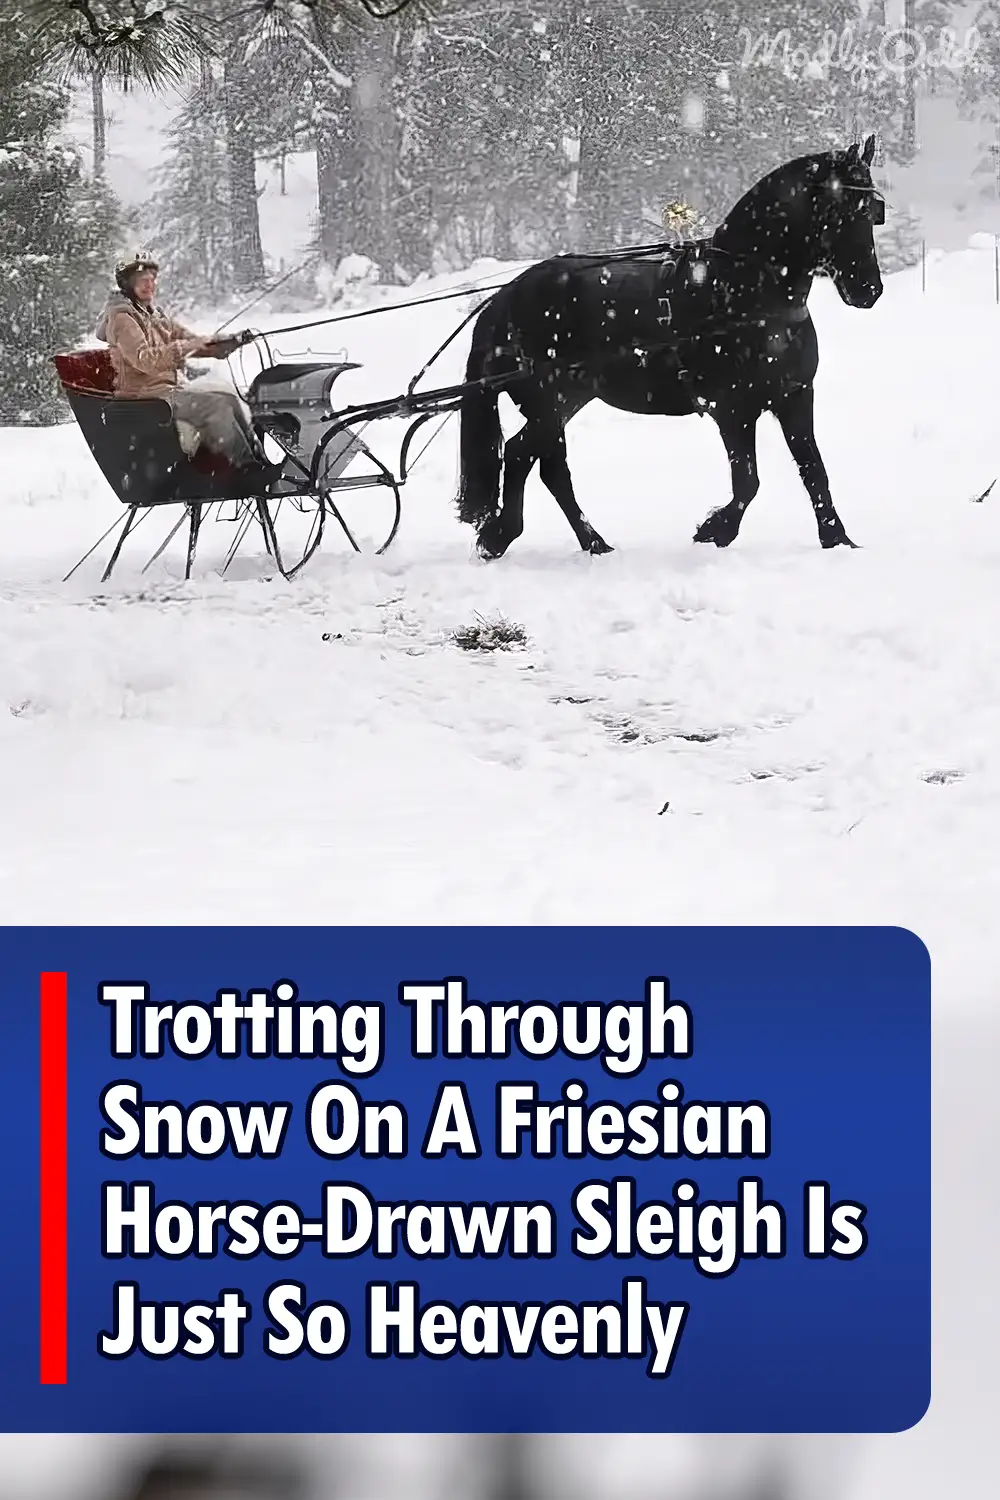 Trotting Through Snow On A Friesian Horse-Drawn Sleigh Is Just So Heavenly